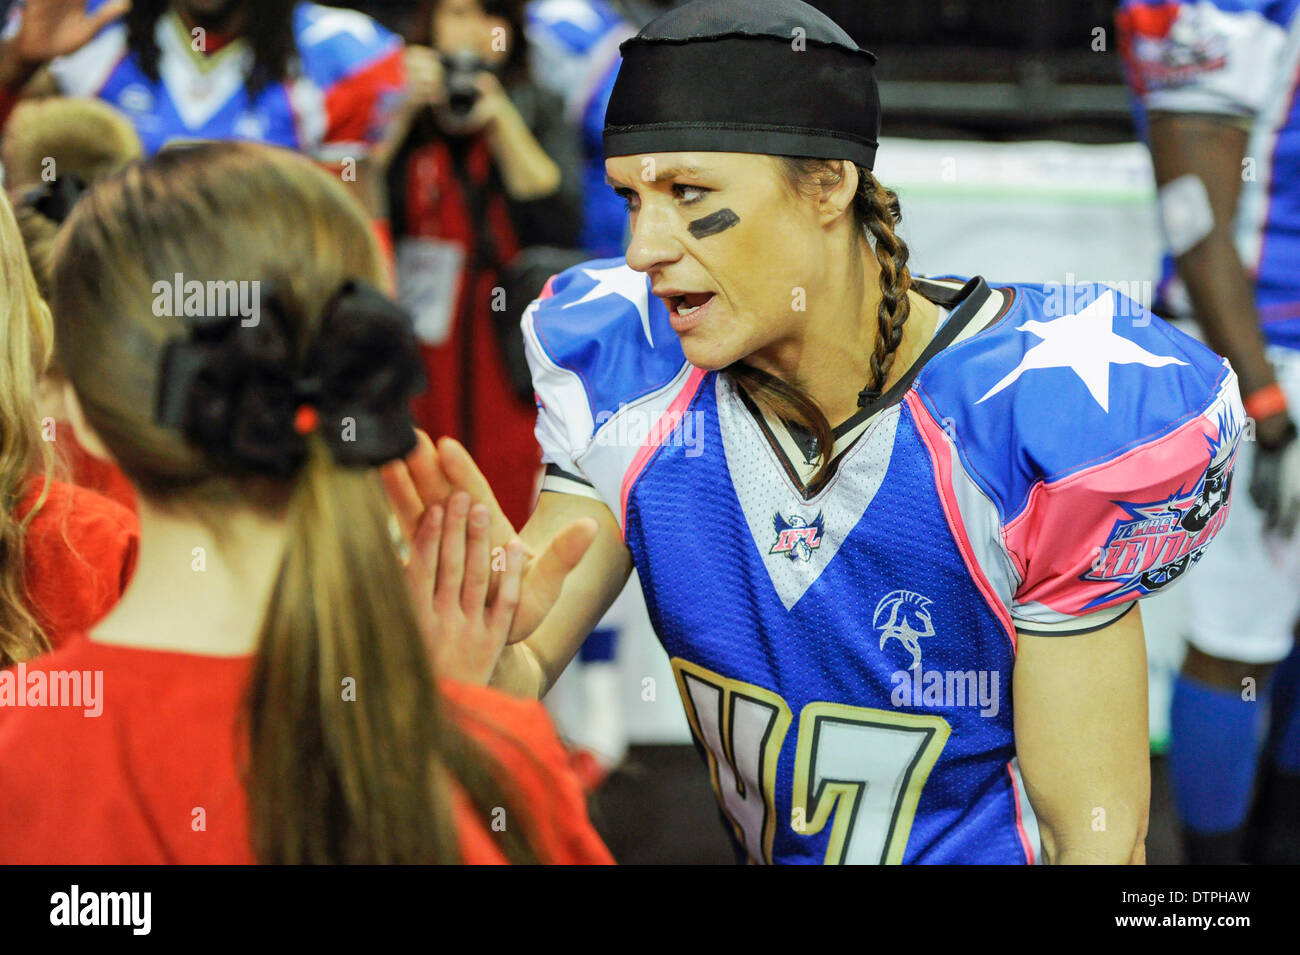 Allen, TX, USA. 21st Feb, 2014. Texas Revolution running back Jennifer Welter high-fives a group of children as they exit the field prior to the Revolution playing the Cedar Rapids Titans in an Indoor Football League game at the Allen Event Center Friday, February 21, 2014, in Allen, Texas. The 5-foot-2-inch, 130 pound Welter is the first woman to play professional football at a position other than kicker, she made the final roster of the Texas Revolution of the Indoor Football League, as a running back. © csm/Alamy Live News Stock Photo